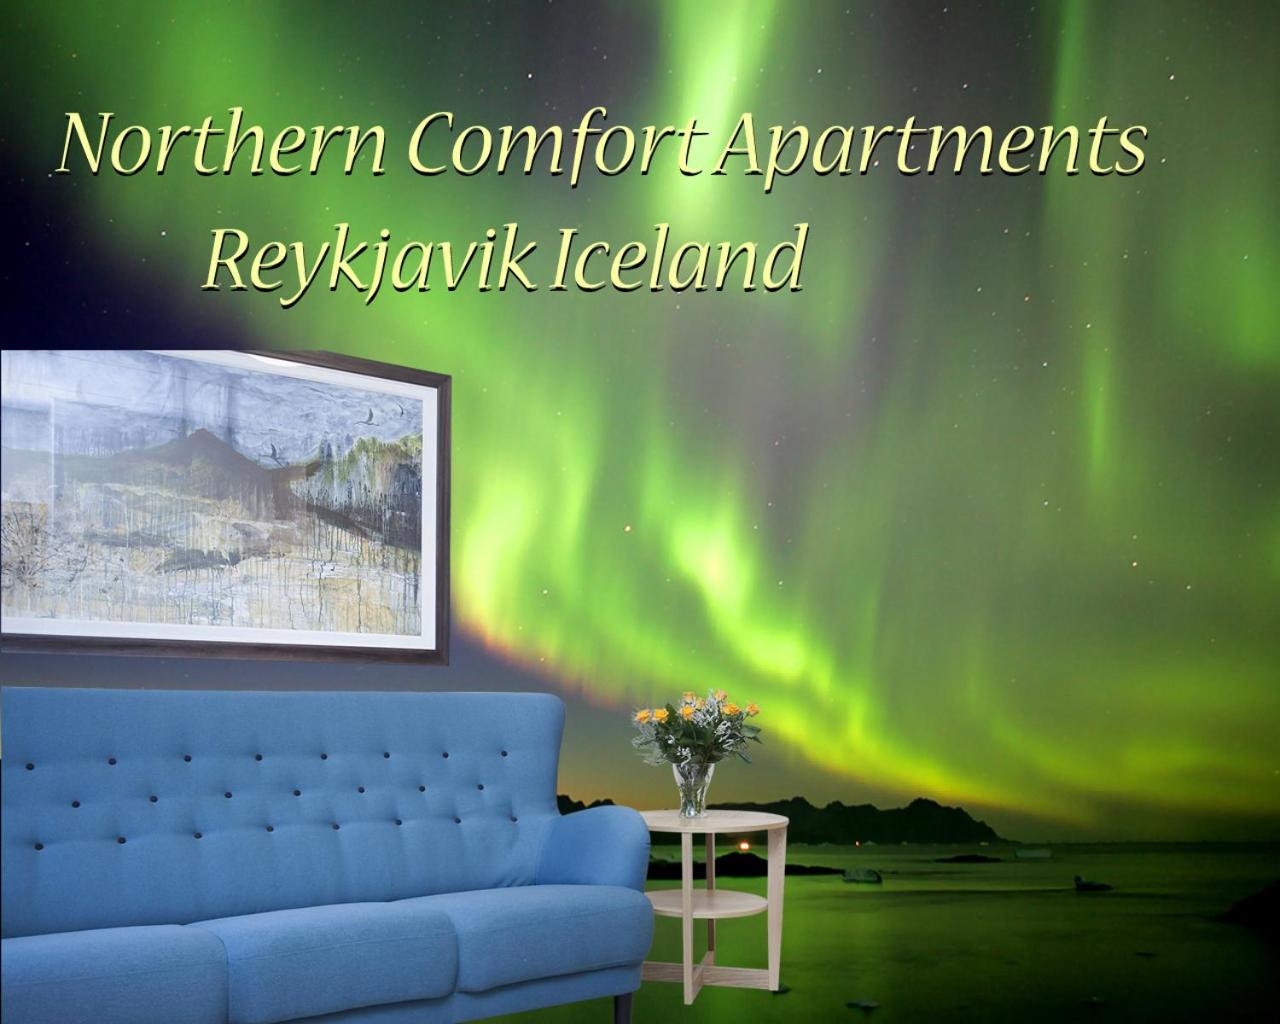 Modern Serviced Hotel Apartments - Northern Comfort Apartments